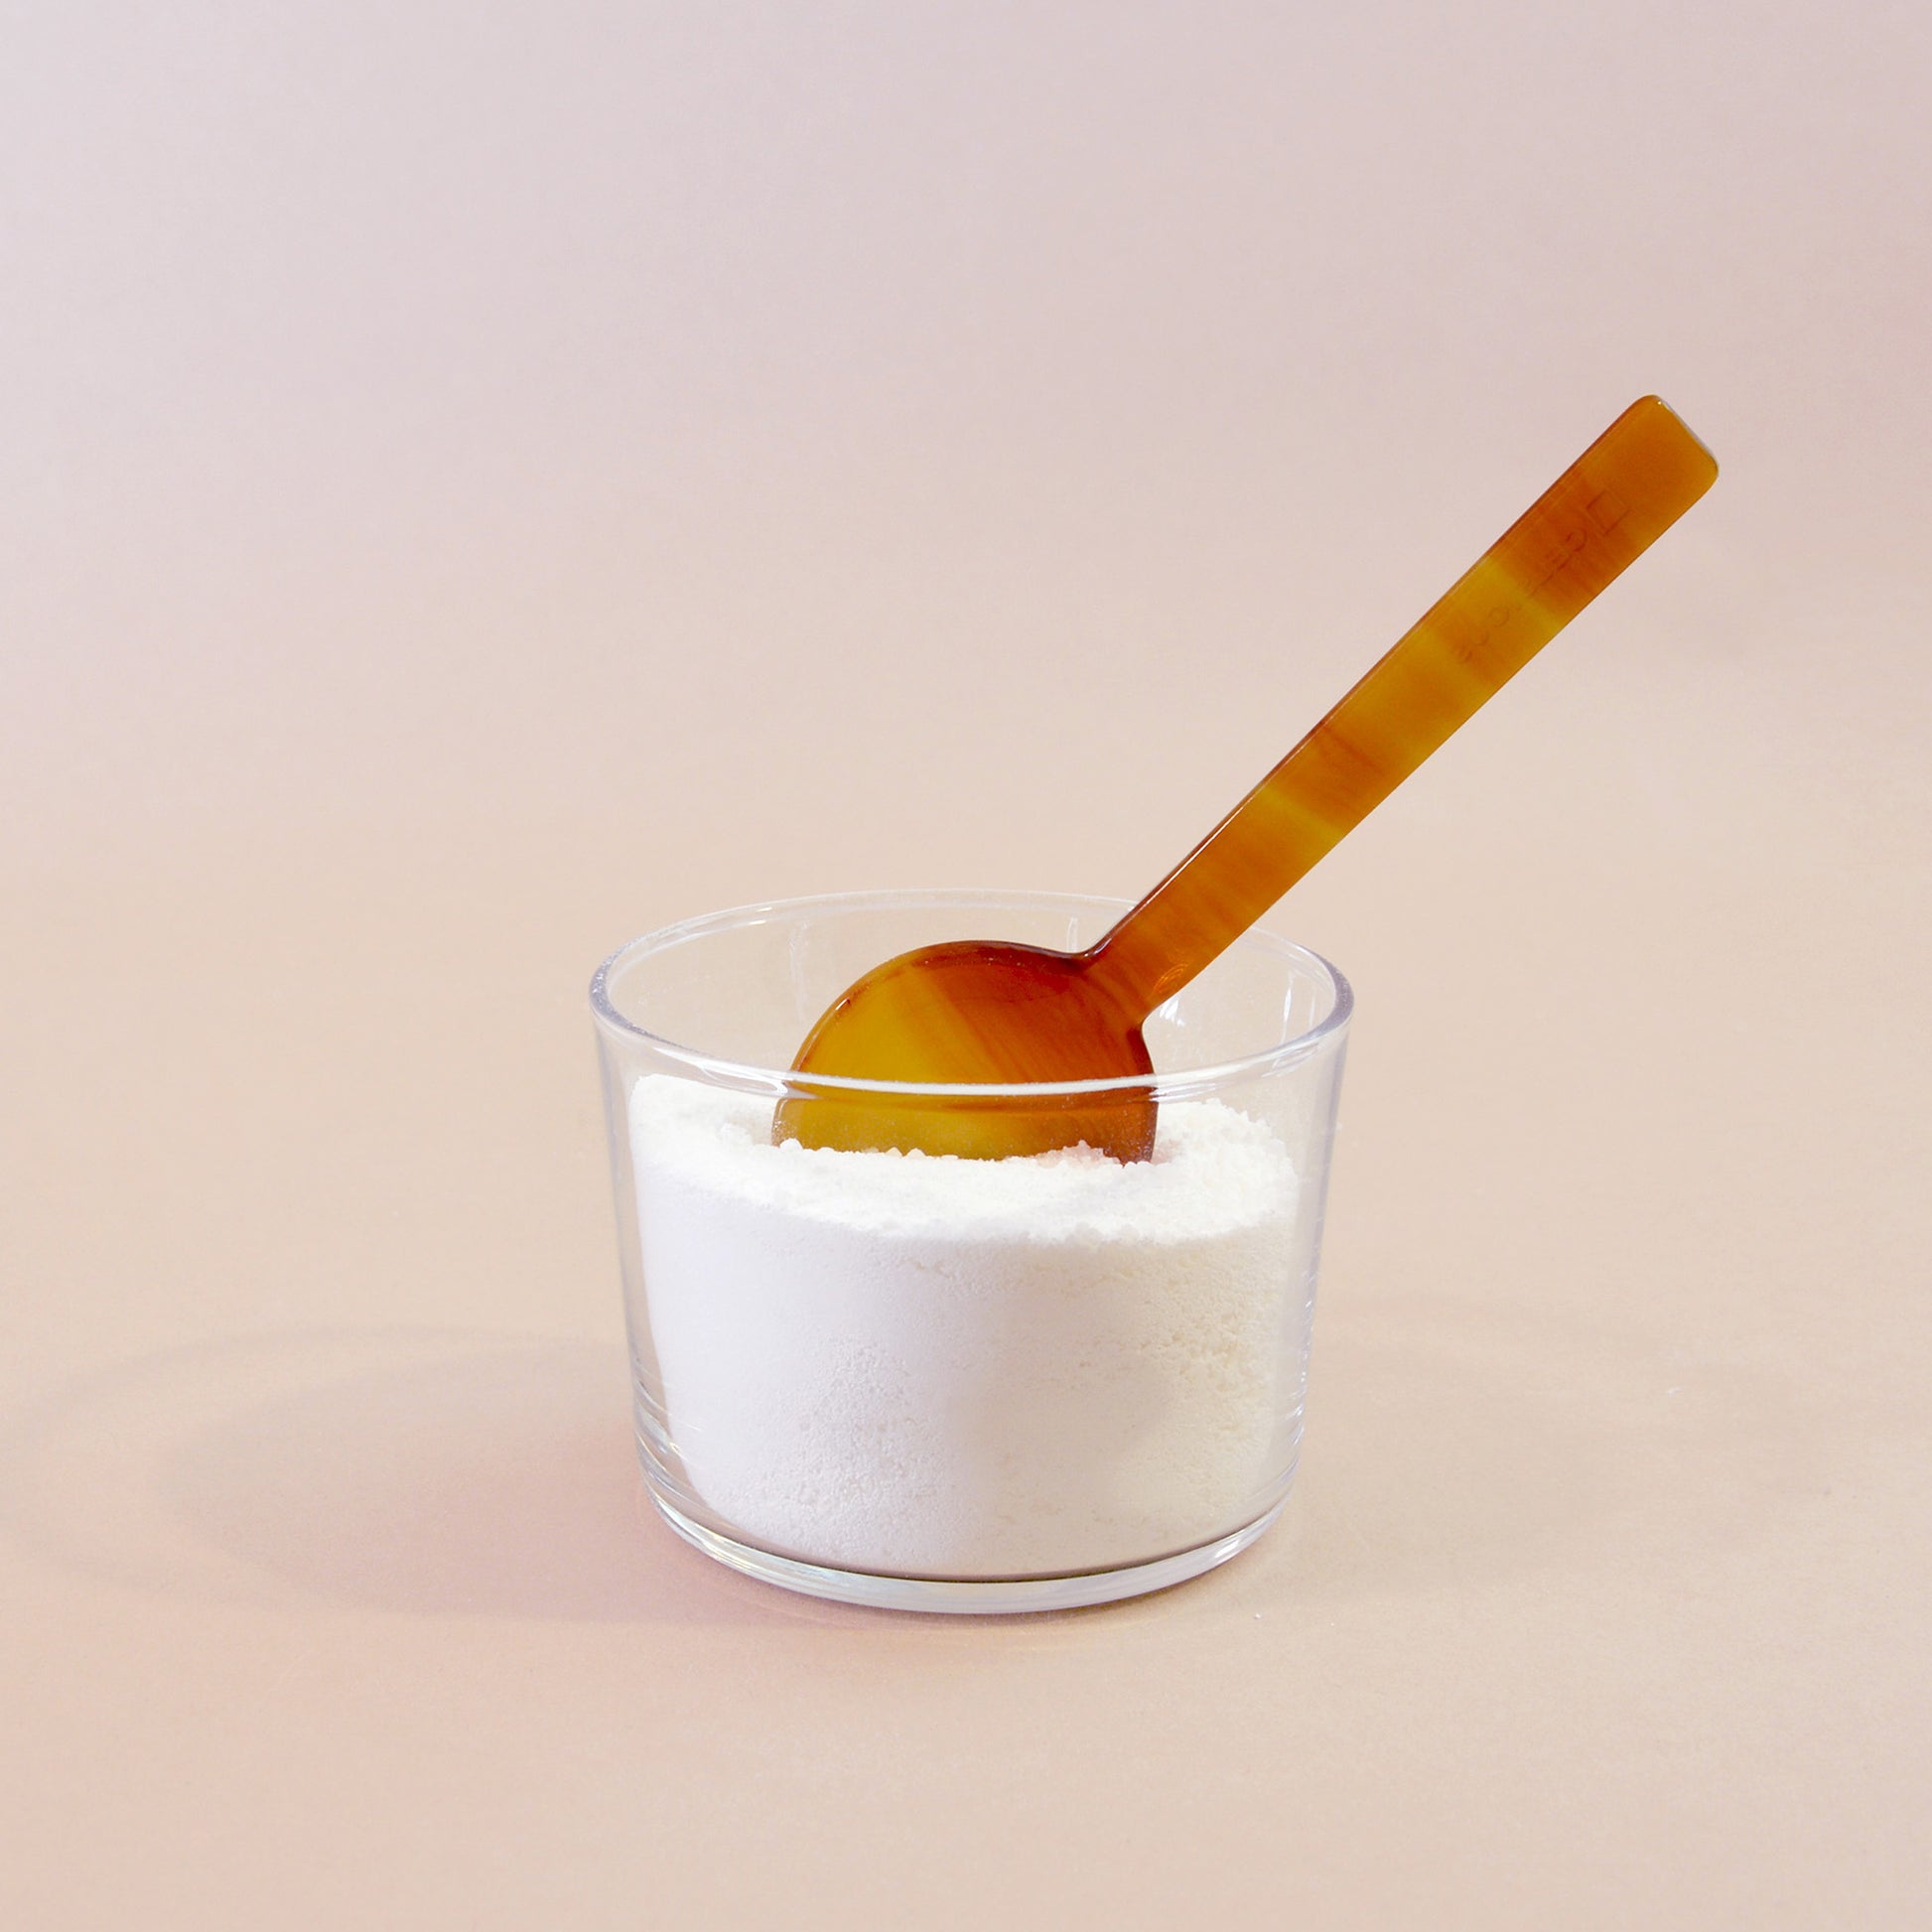 A sunset orange and yellow measuring spoon perched in a glass full of white laundry powder